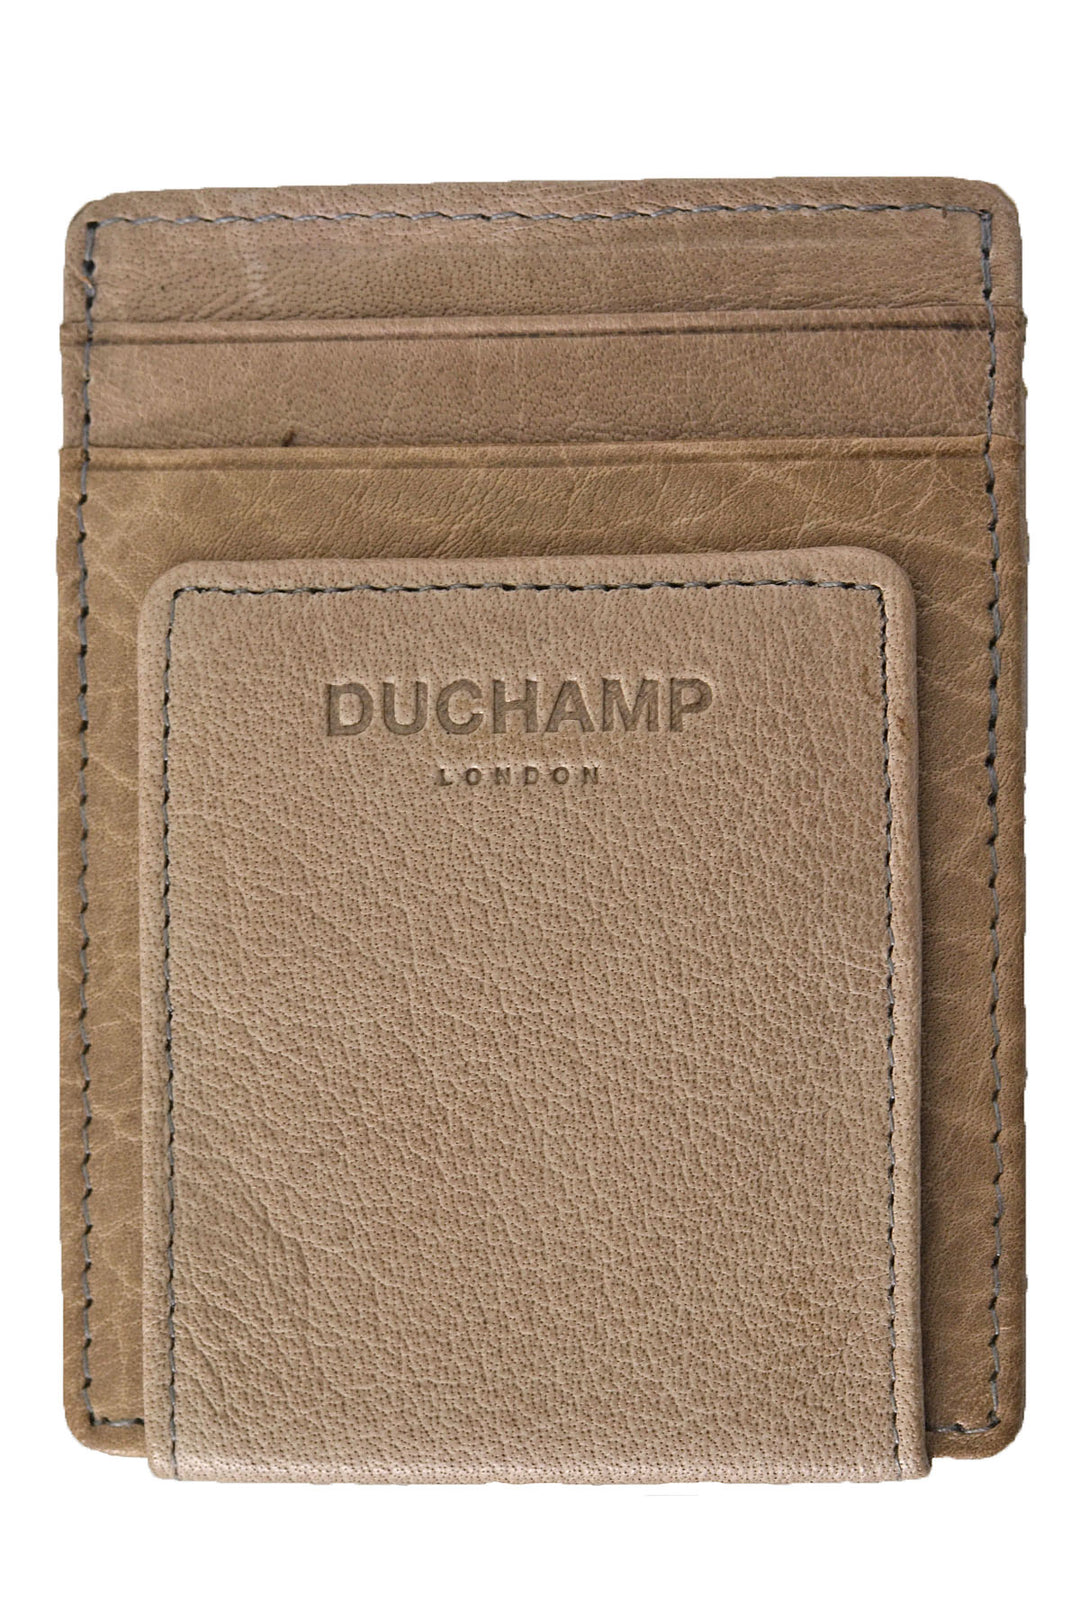 Duchamp Credit Card and Money Clip Wallet